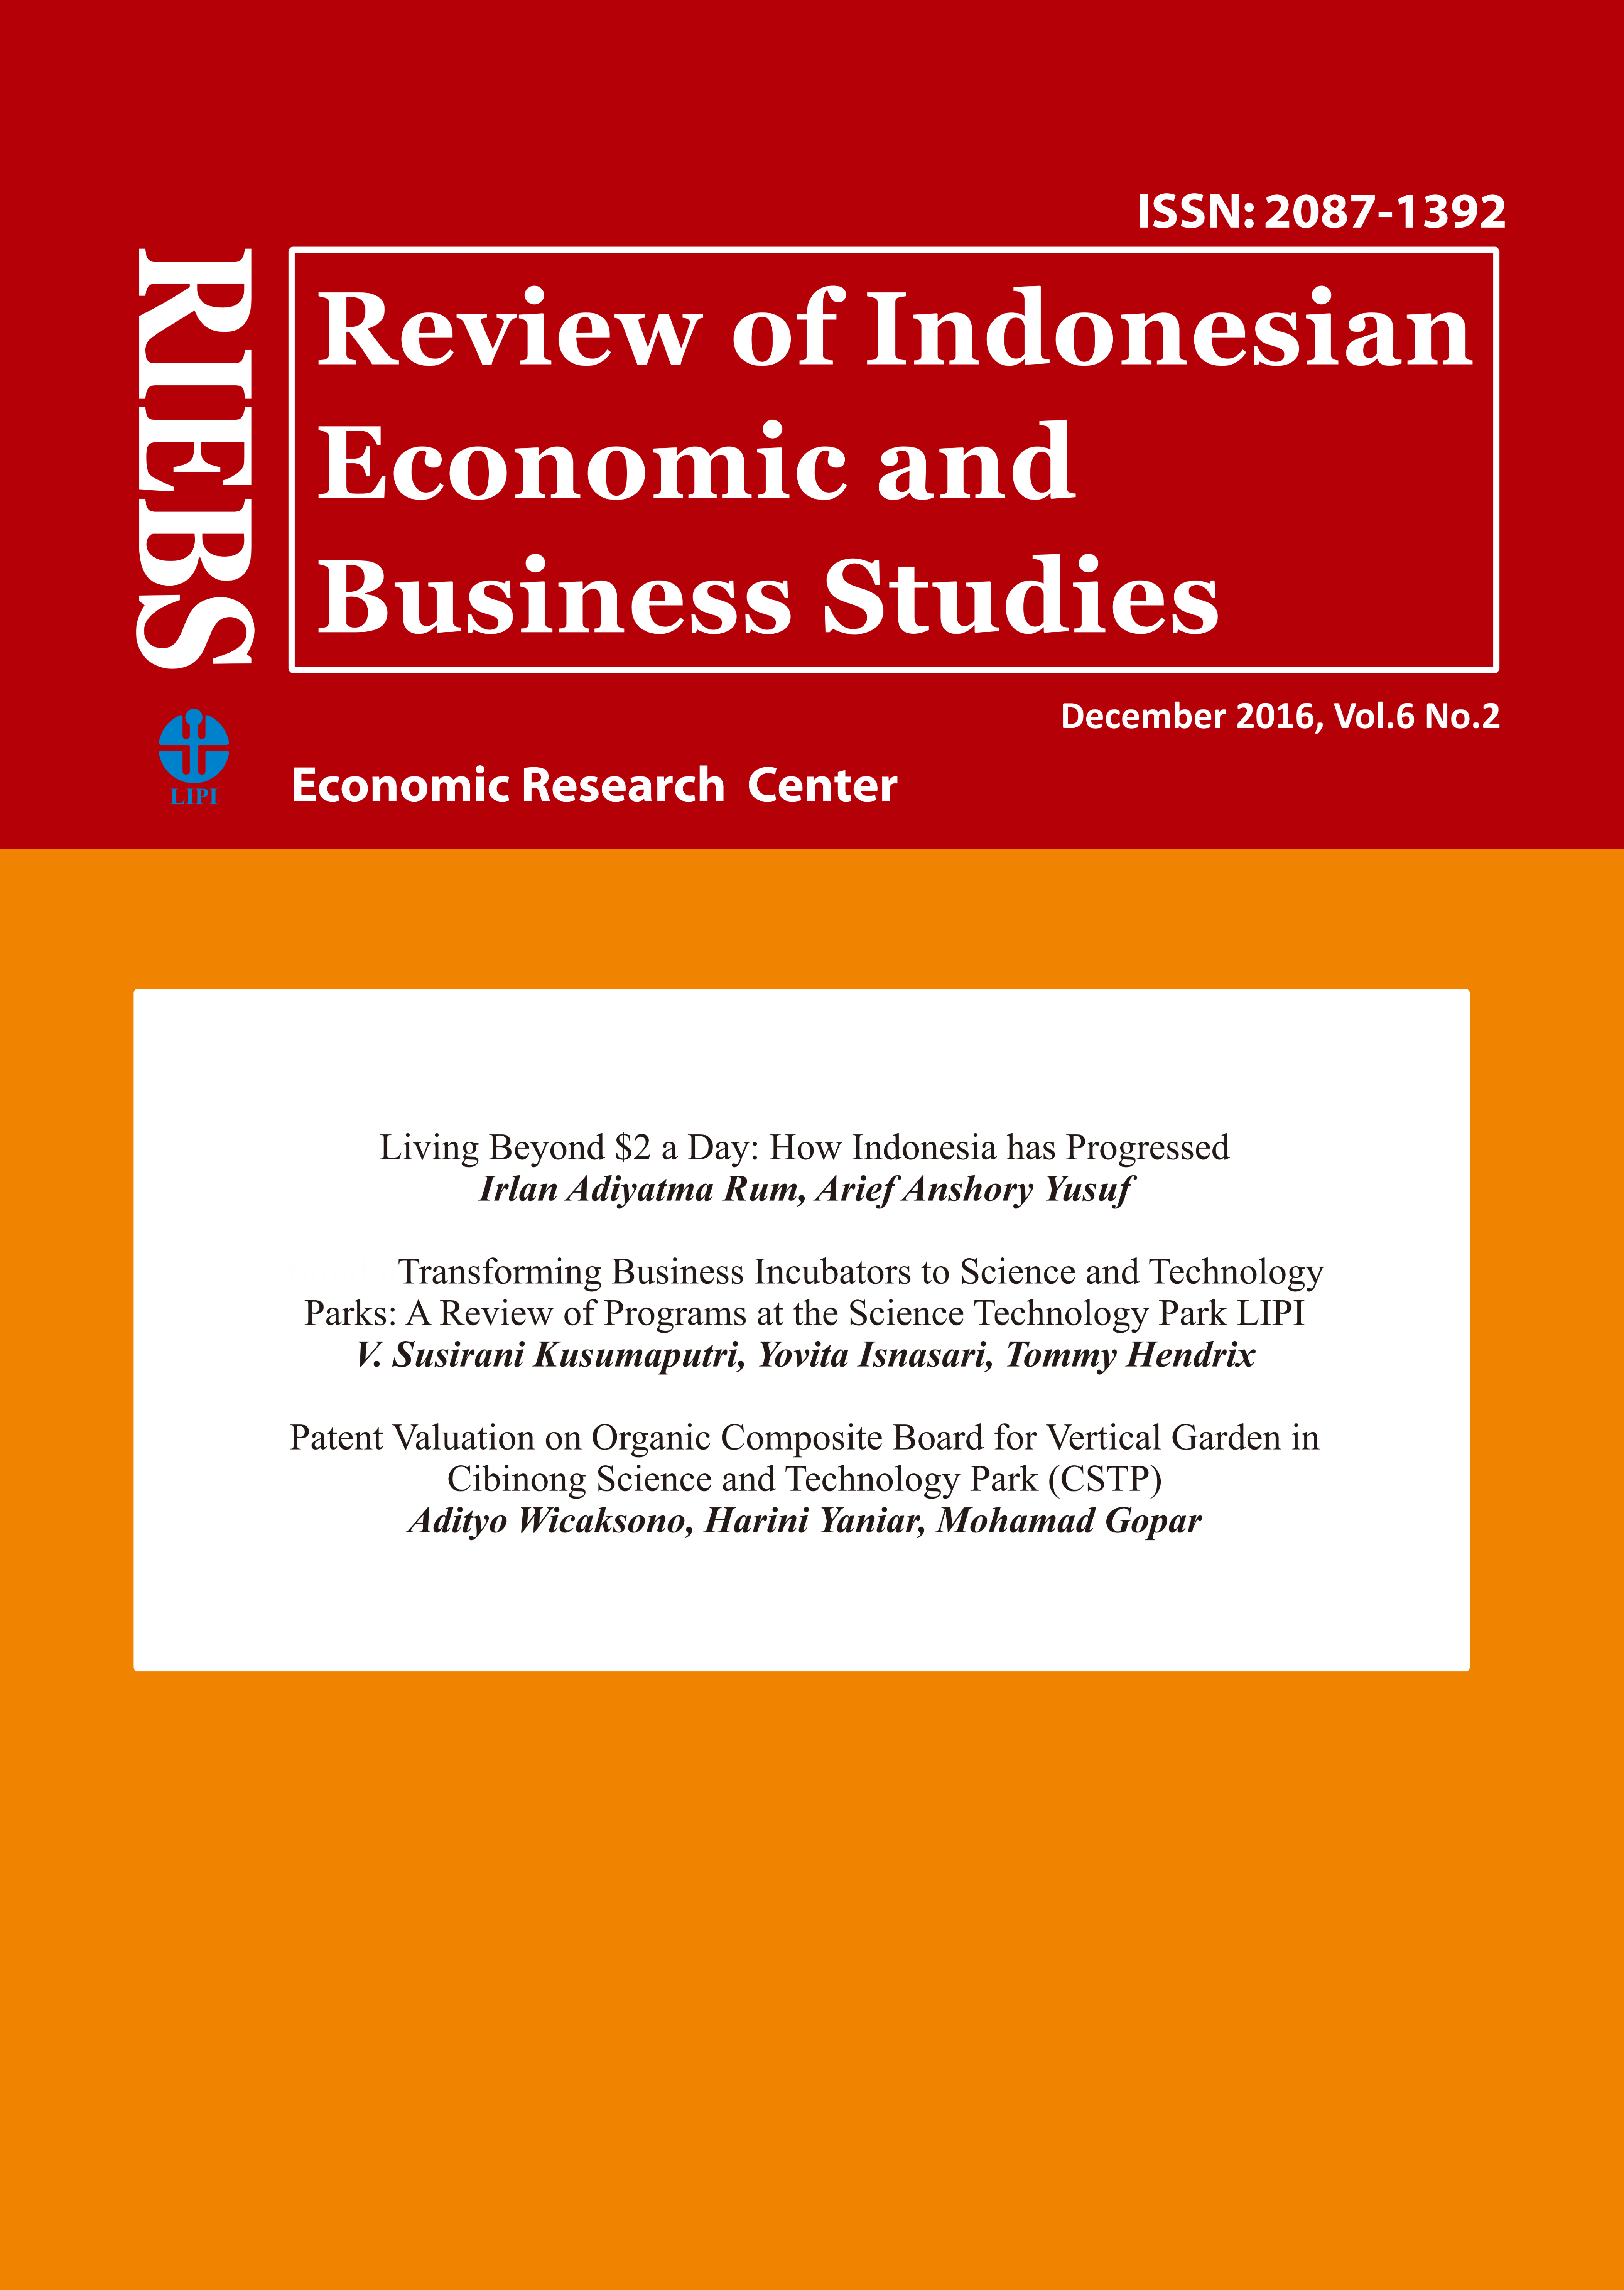 RIEBS : review of Indonesian economic and business studies